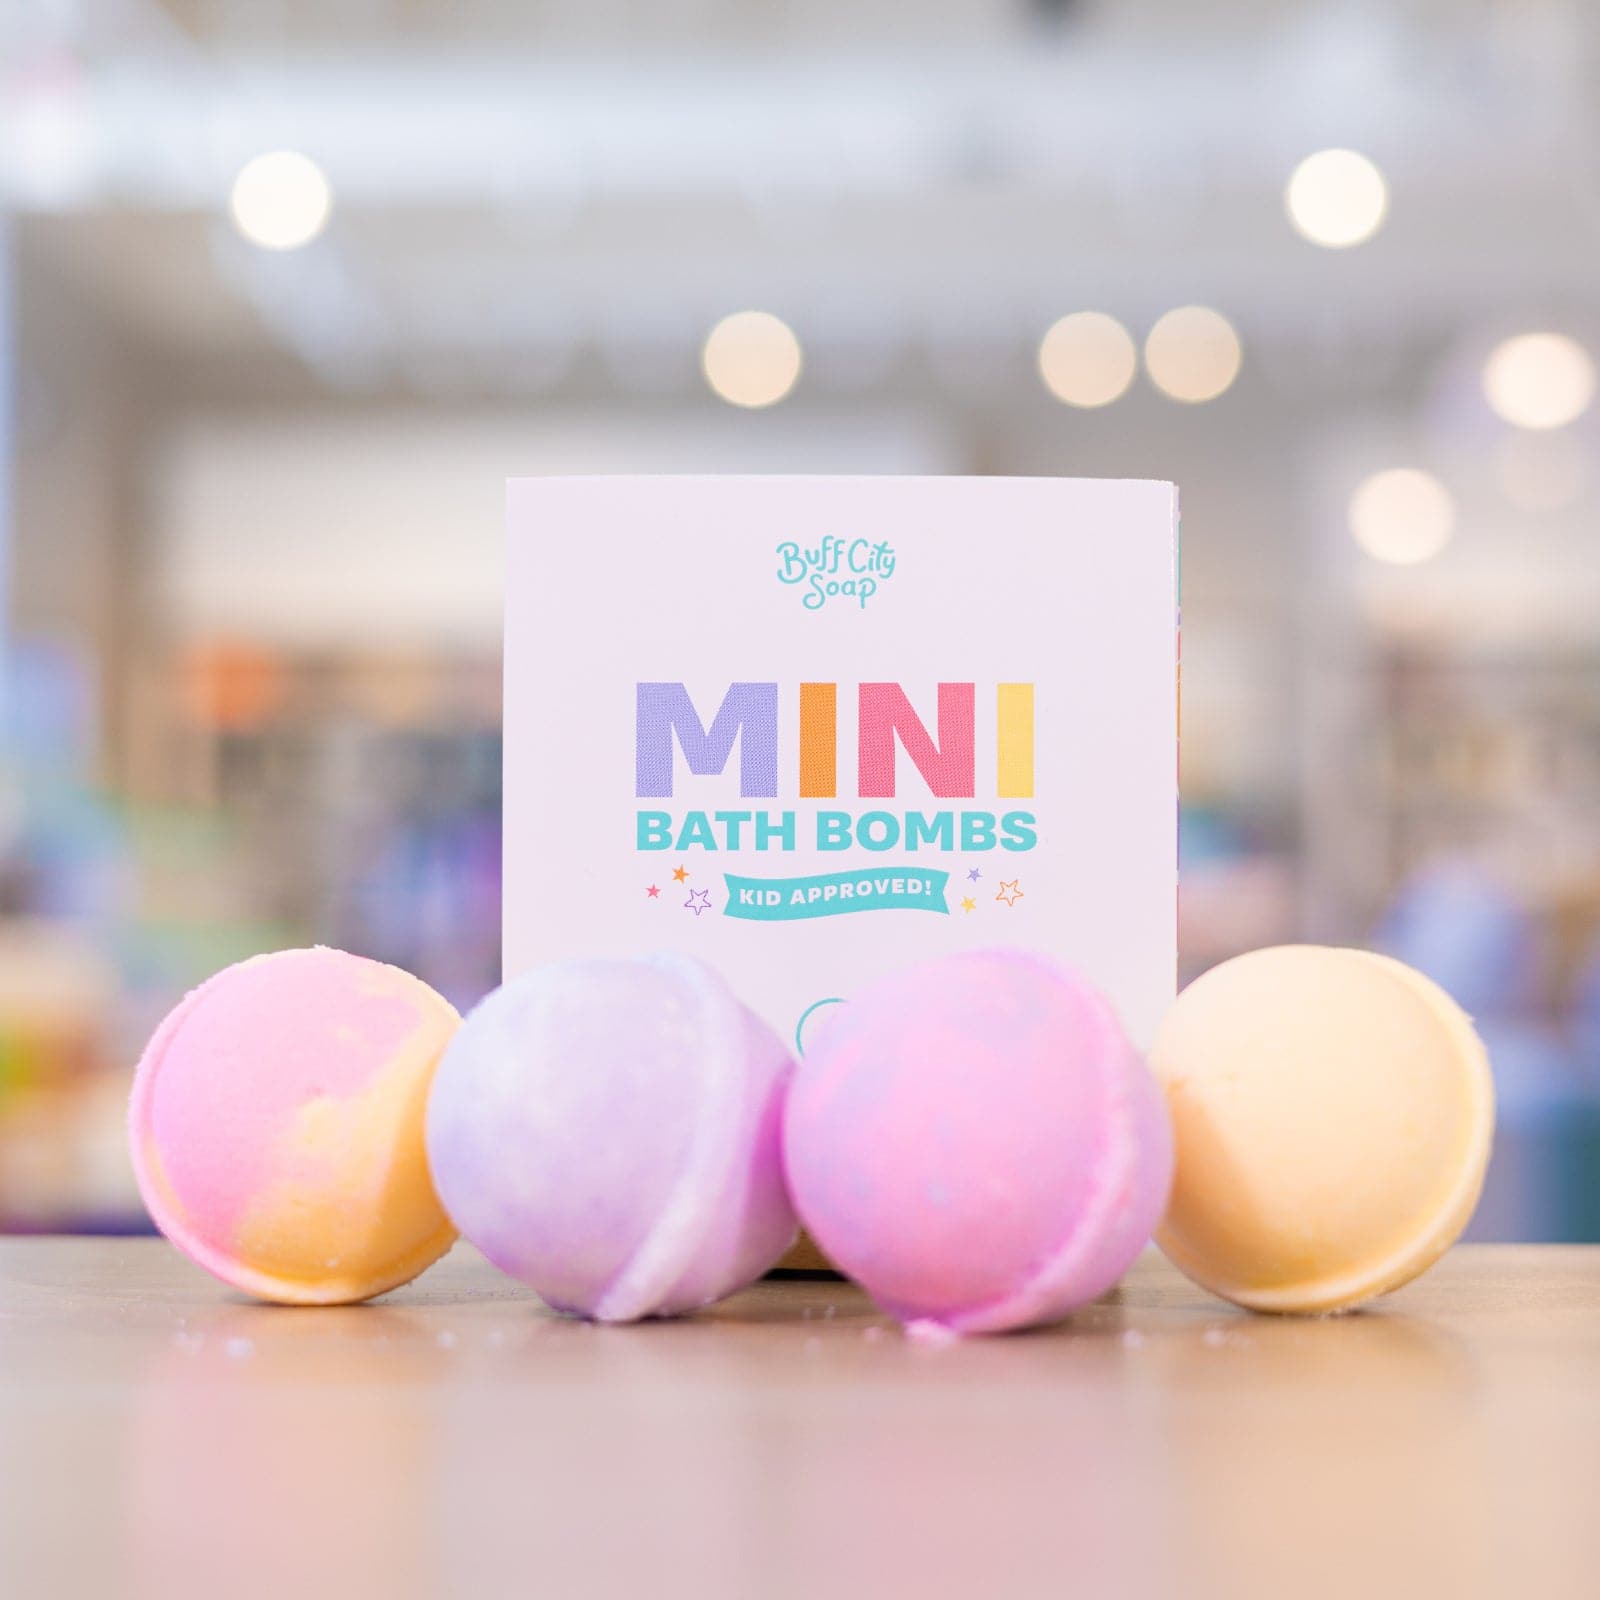 box that says Mini Bath Bombs with 4 pink and orange Mini Bath Bombs placed in front of it